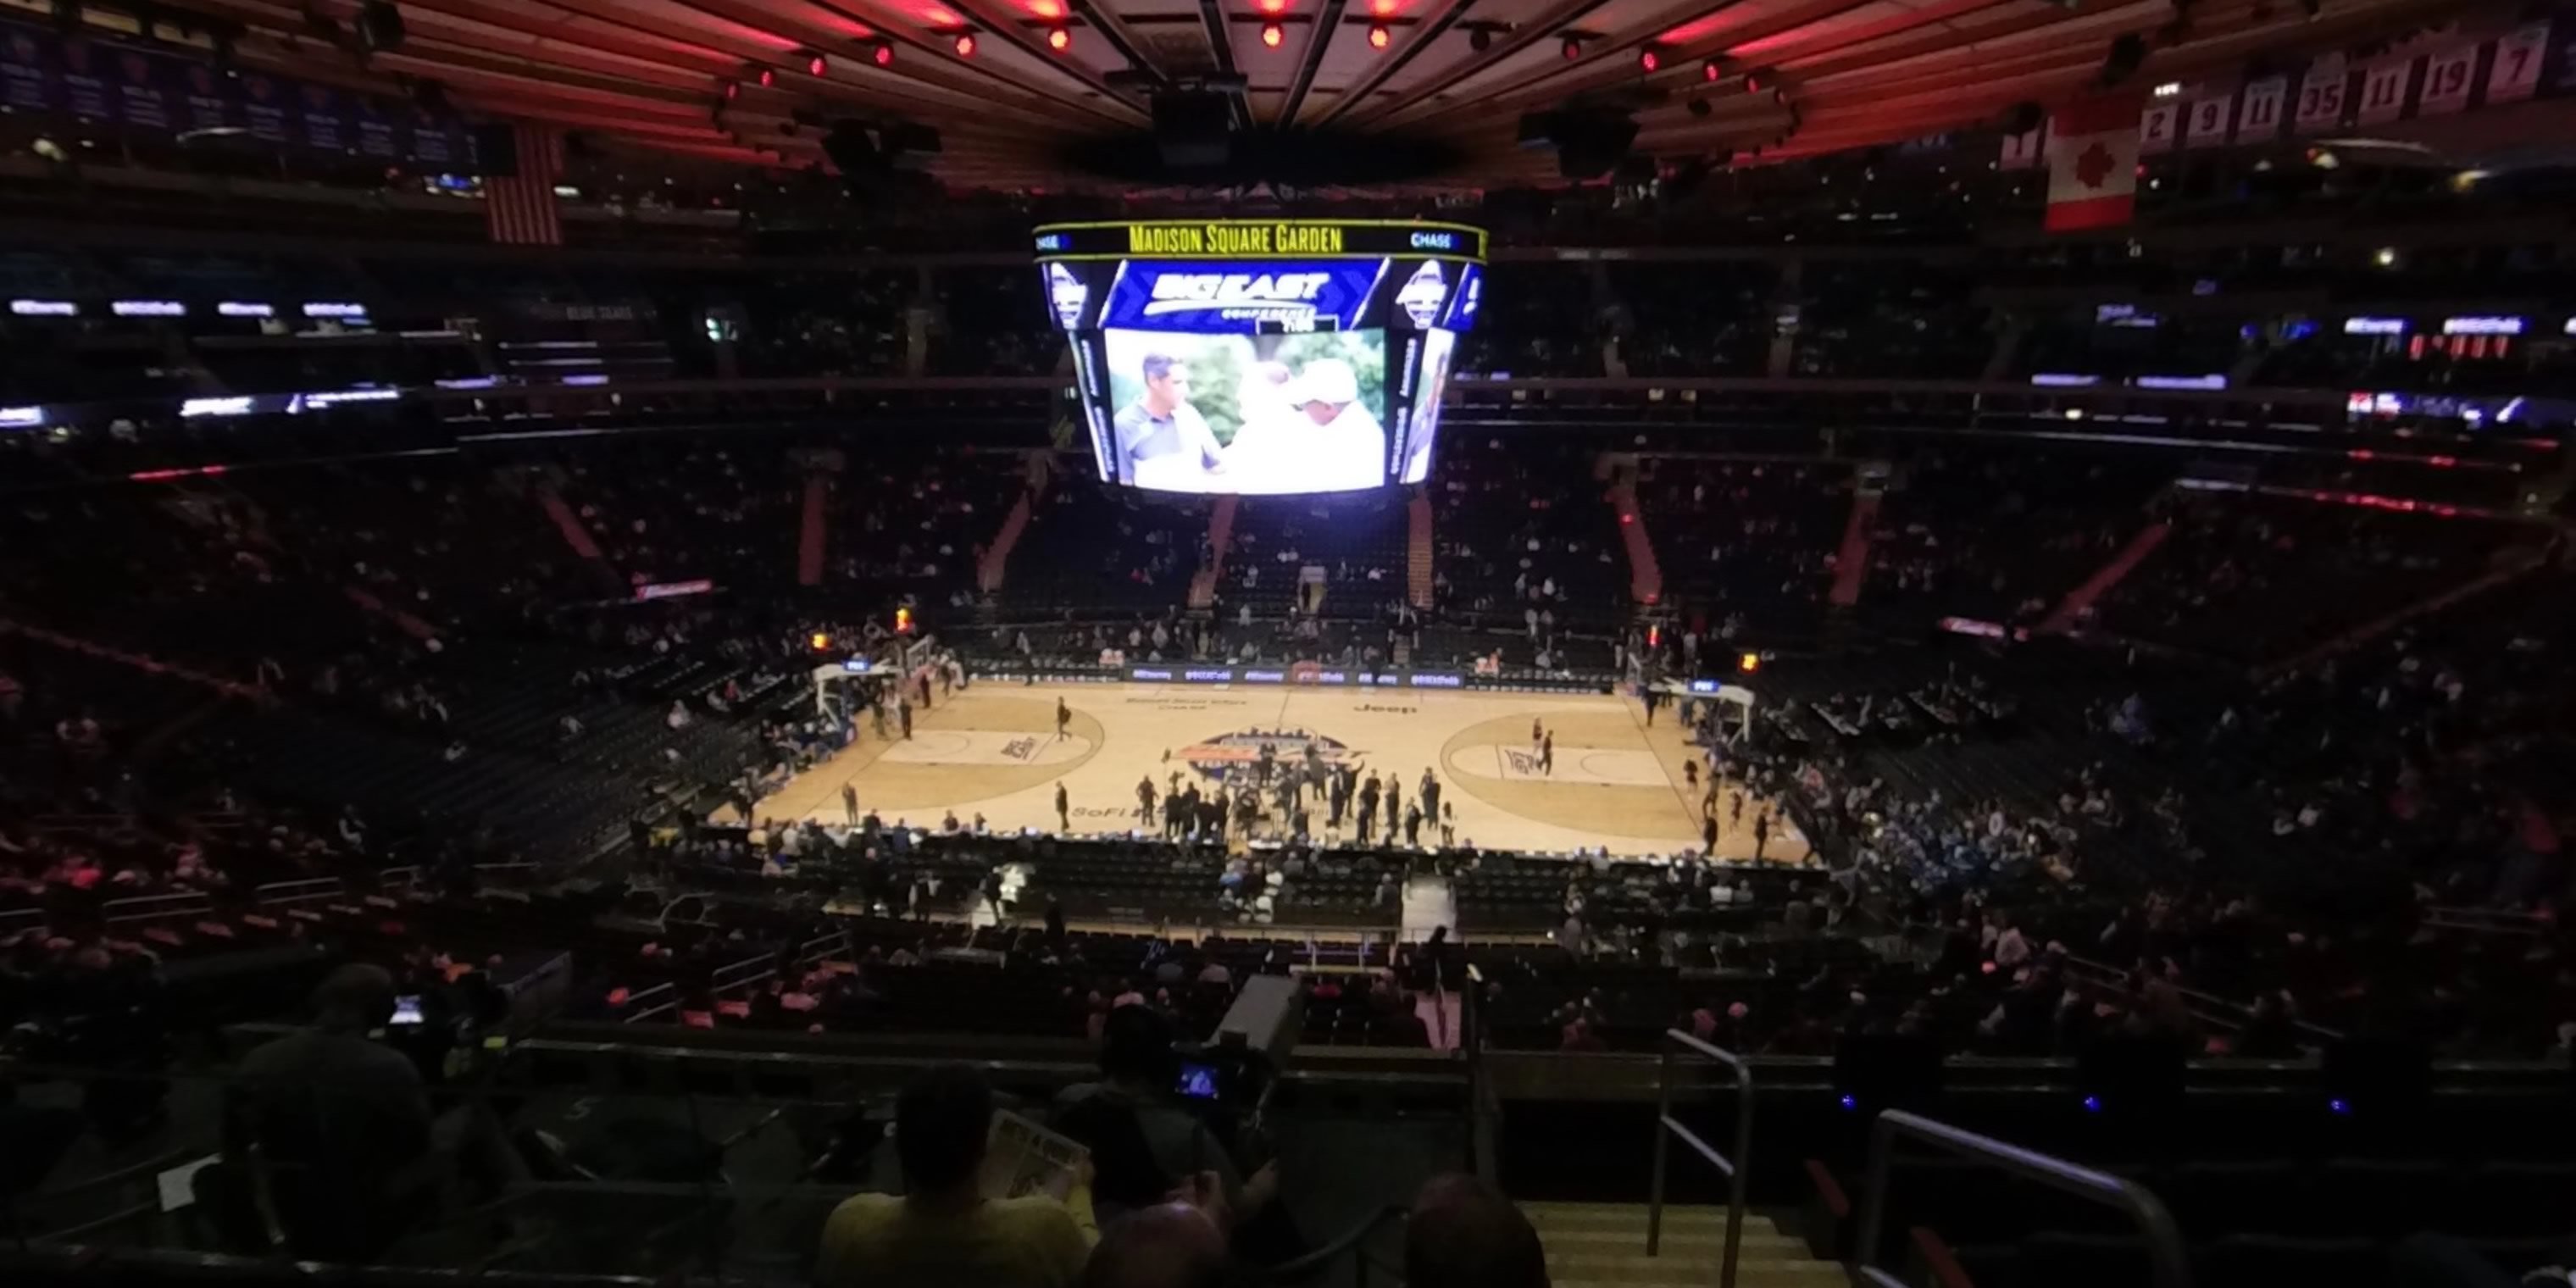 section 224 panoramic seat view  for basketball - madison square garden